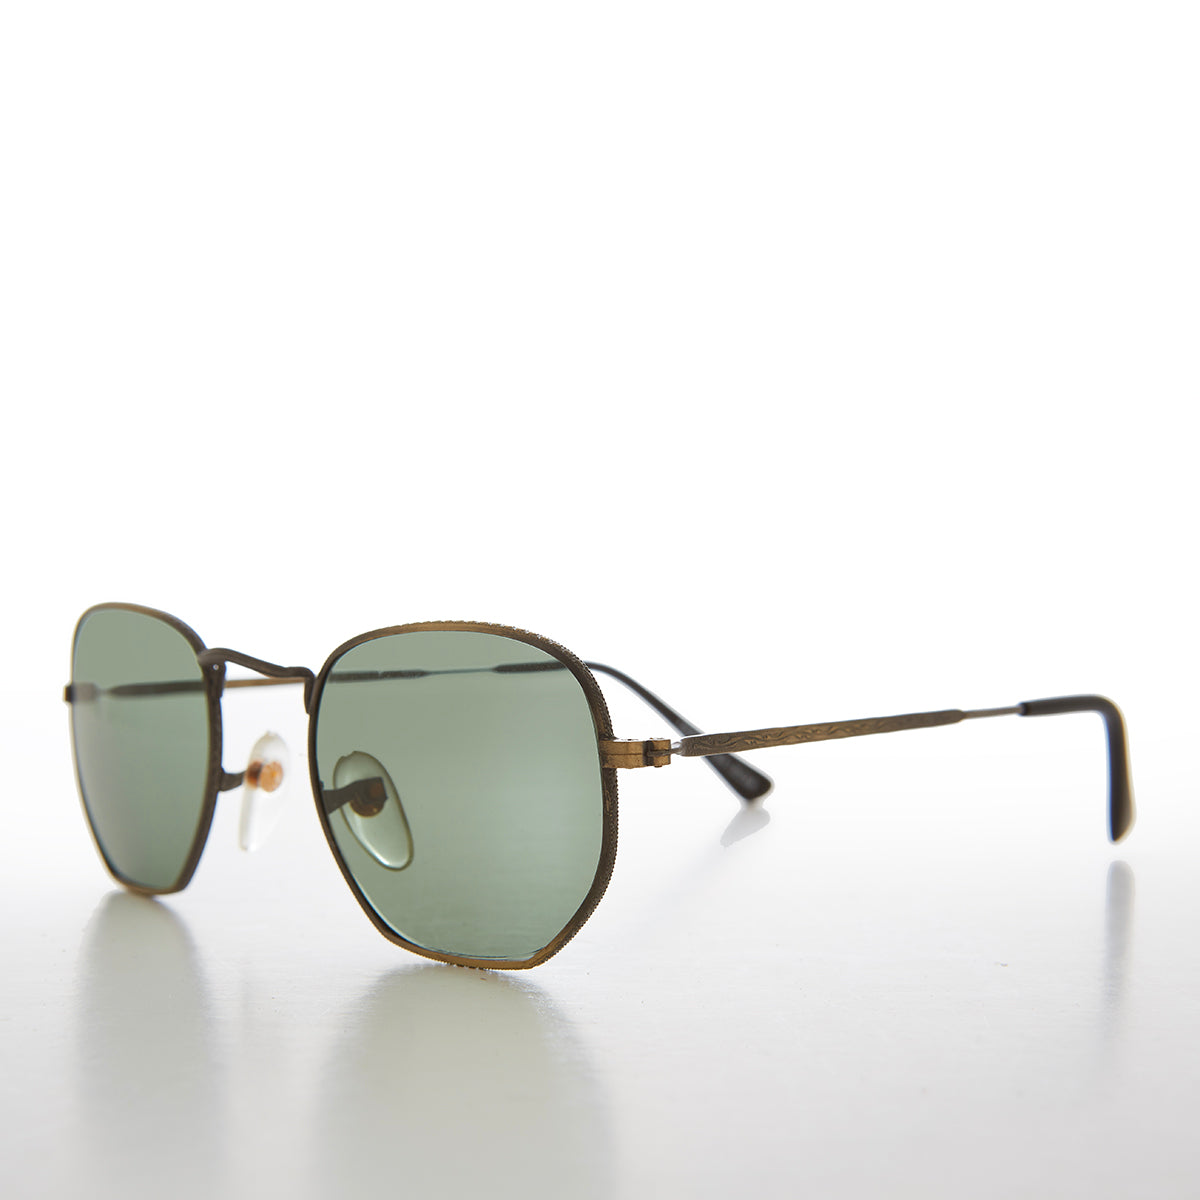 Square Metal Sunglasses with Glass Lenses - Mika